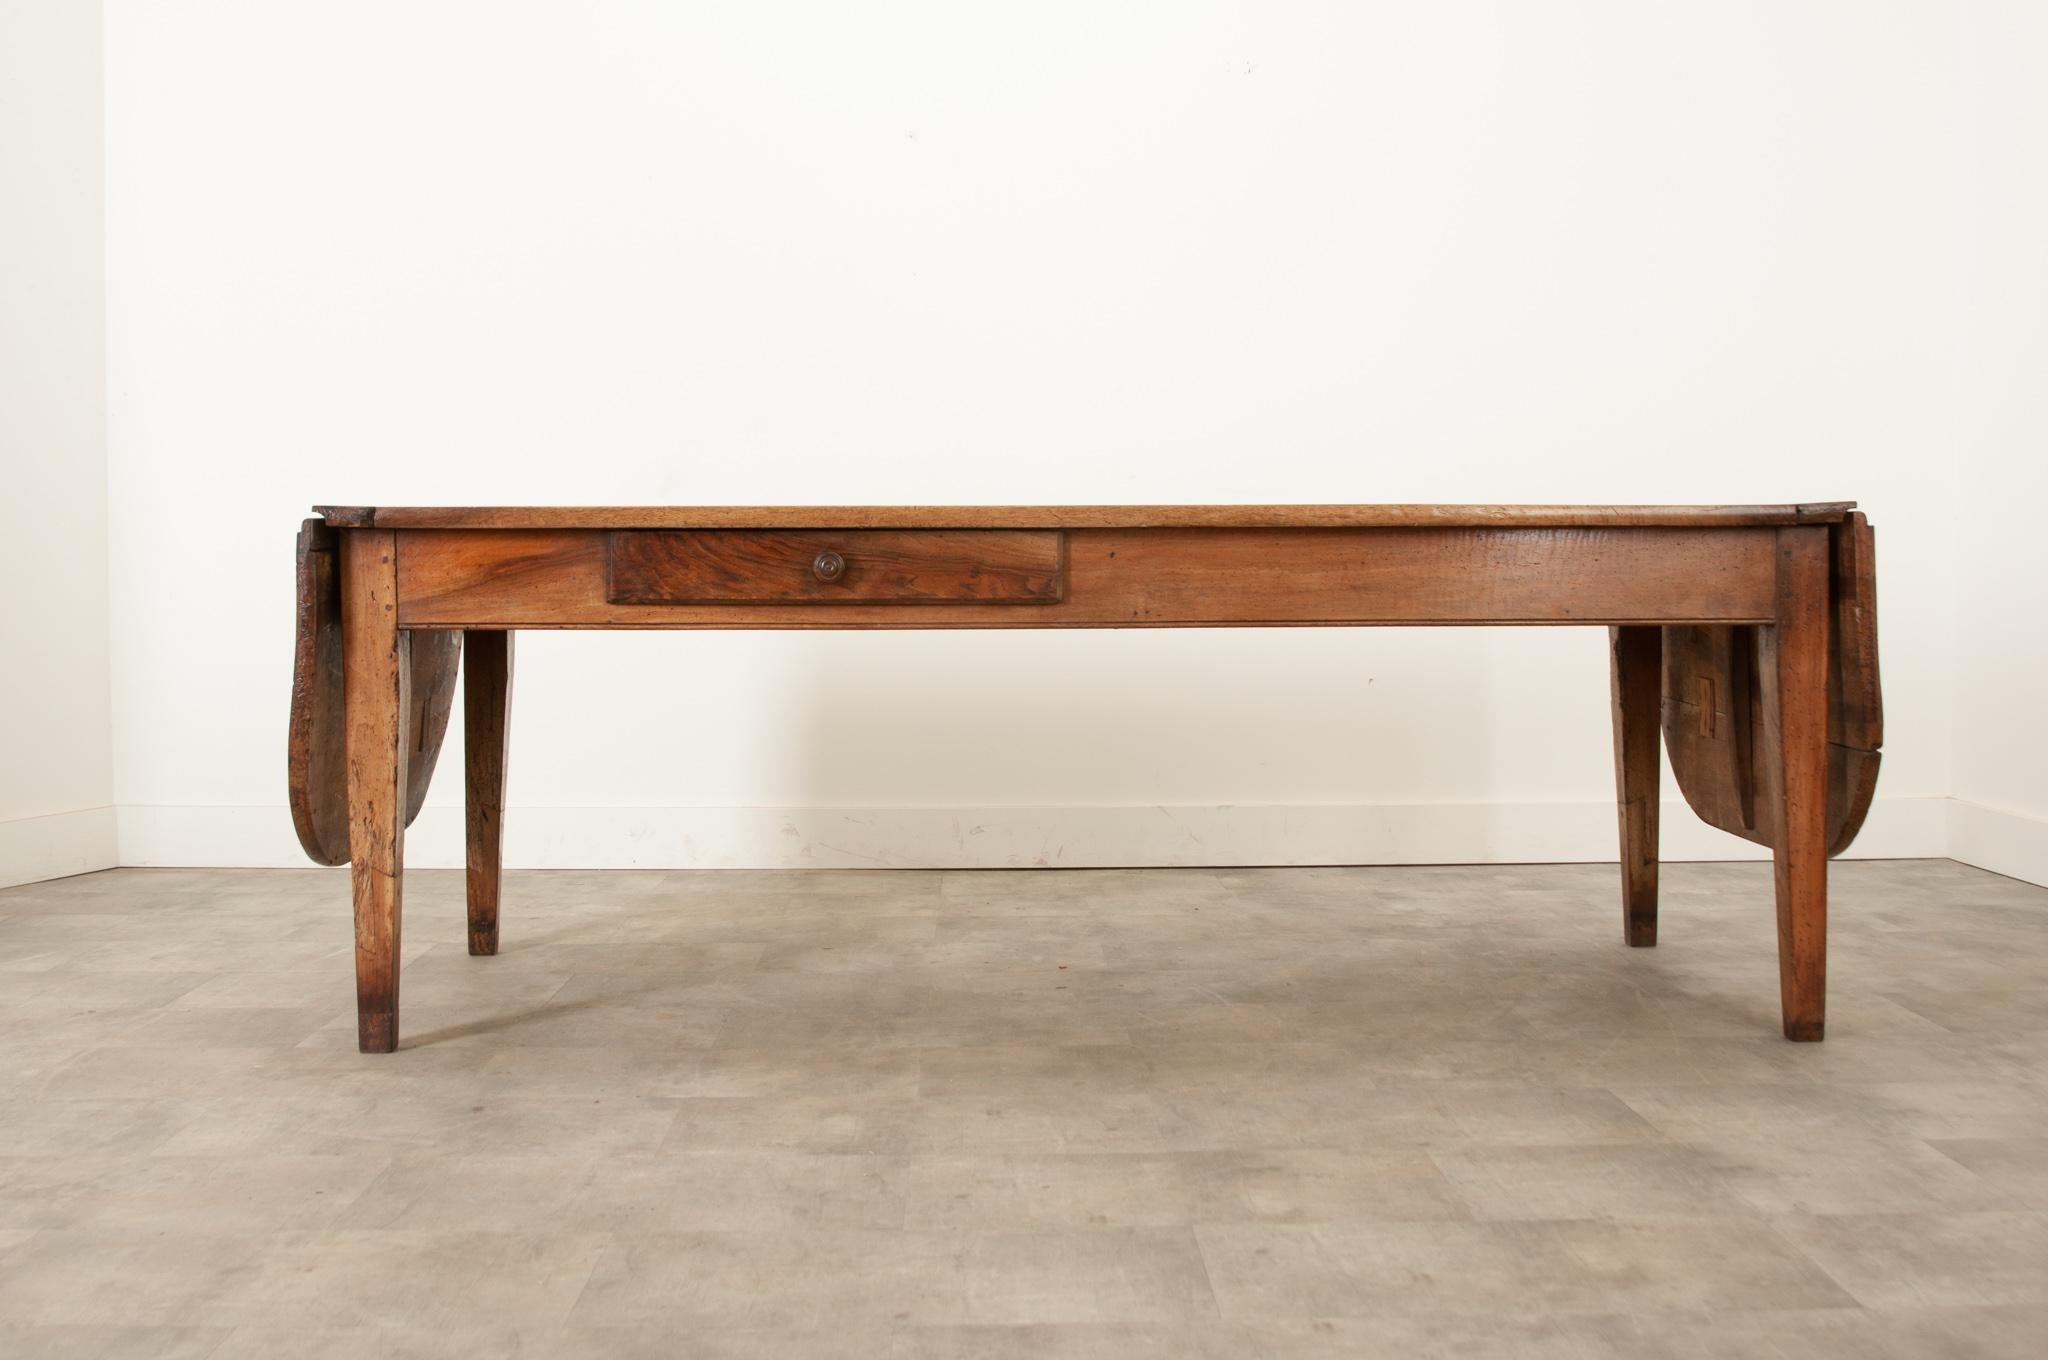 An impressive solid walnut dining table over 10’ long from the 1780’s Normandy, France. This dining table is versatile with two functional drop leaf ends. Recently polished with a French paste wax, this table has a stunning patina that you can’t